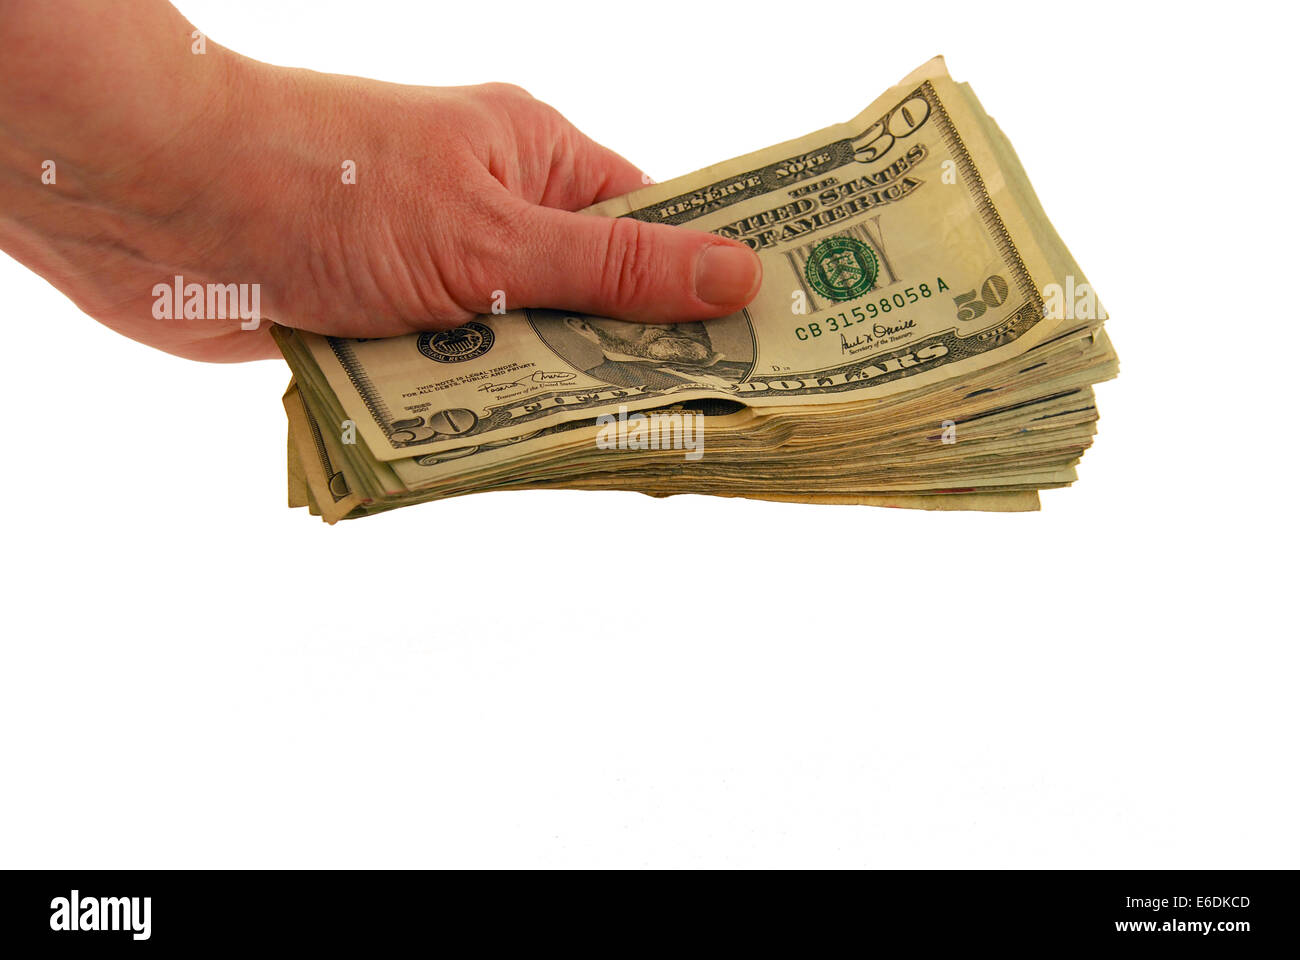 Money in hand in the form of many large bills Stock Photo